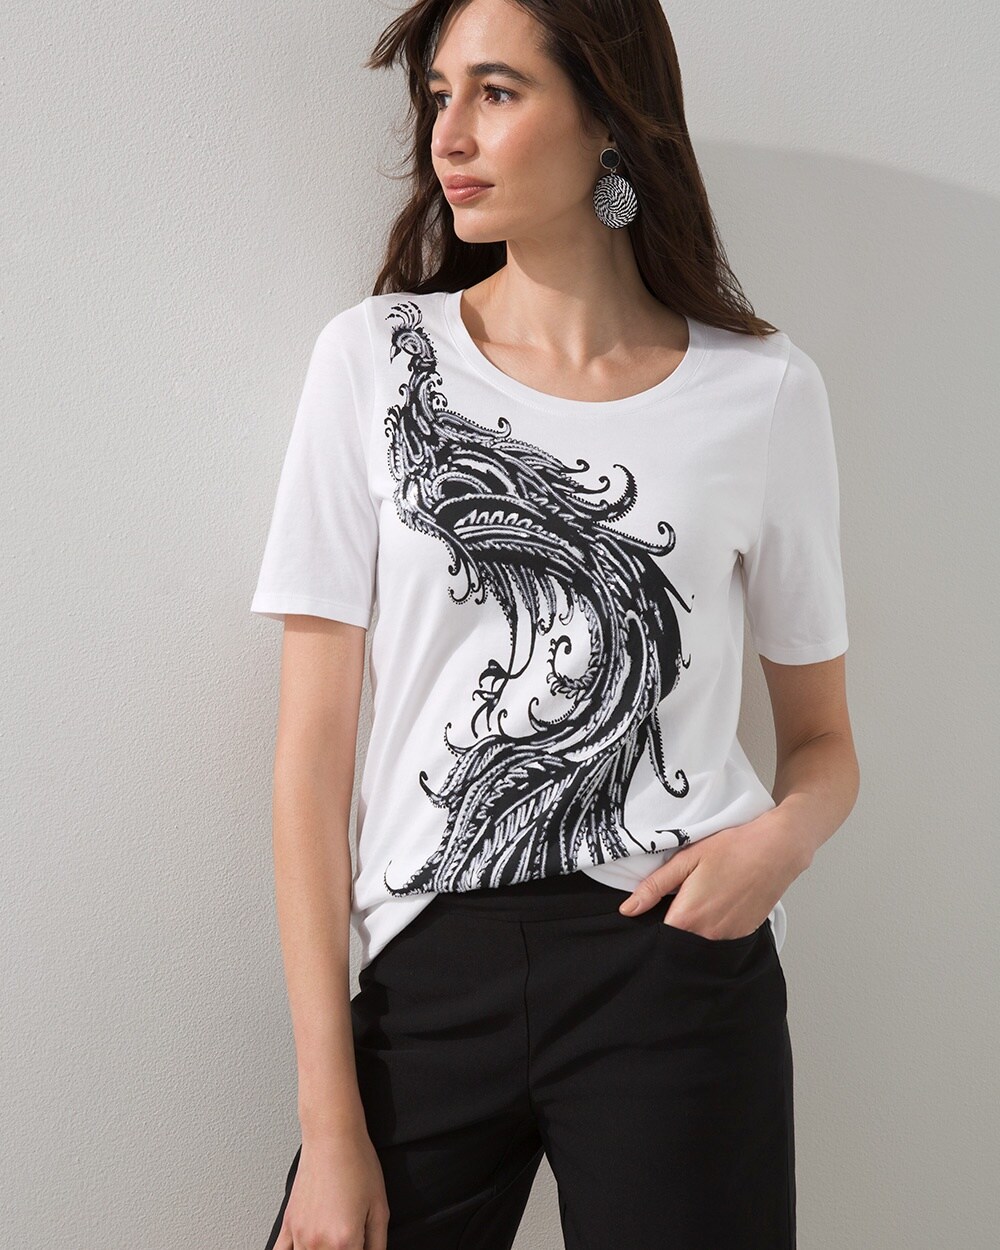 Cotton-Blend Embellished Graphic Tee